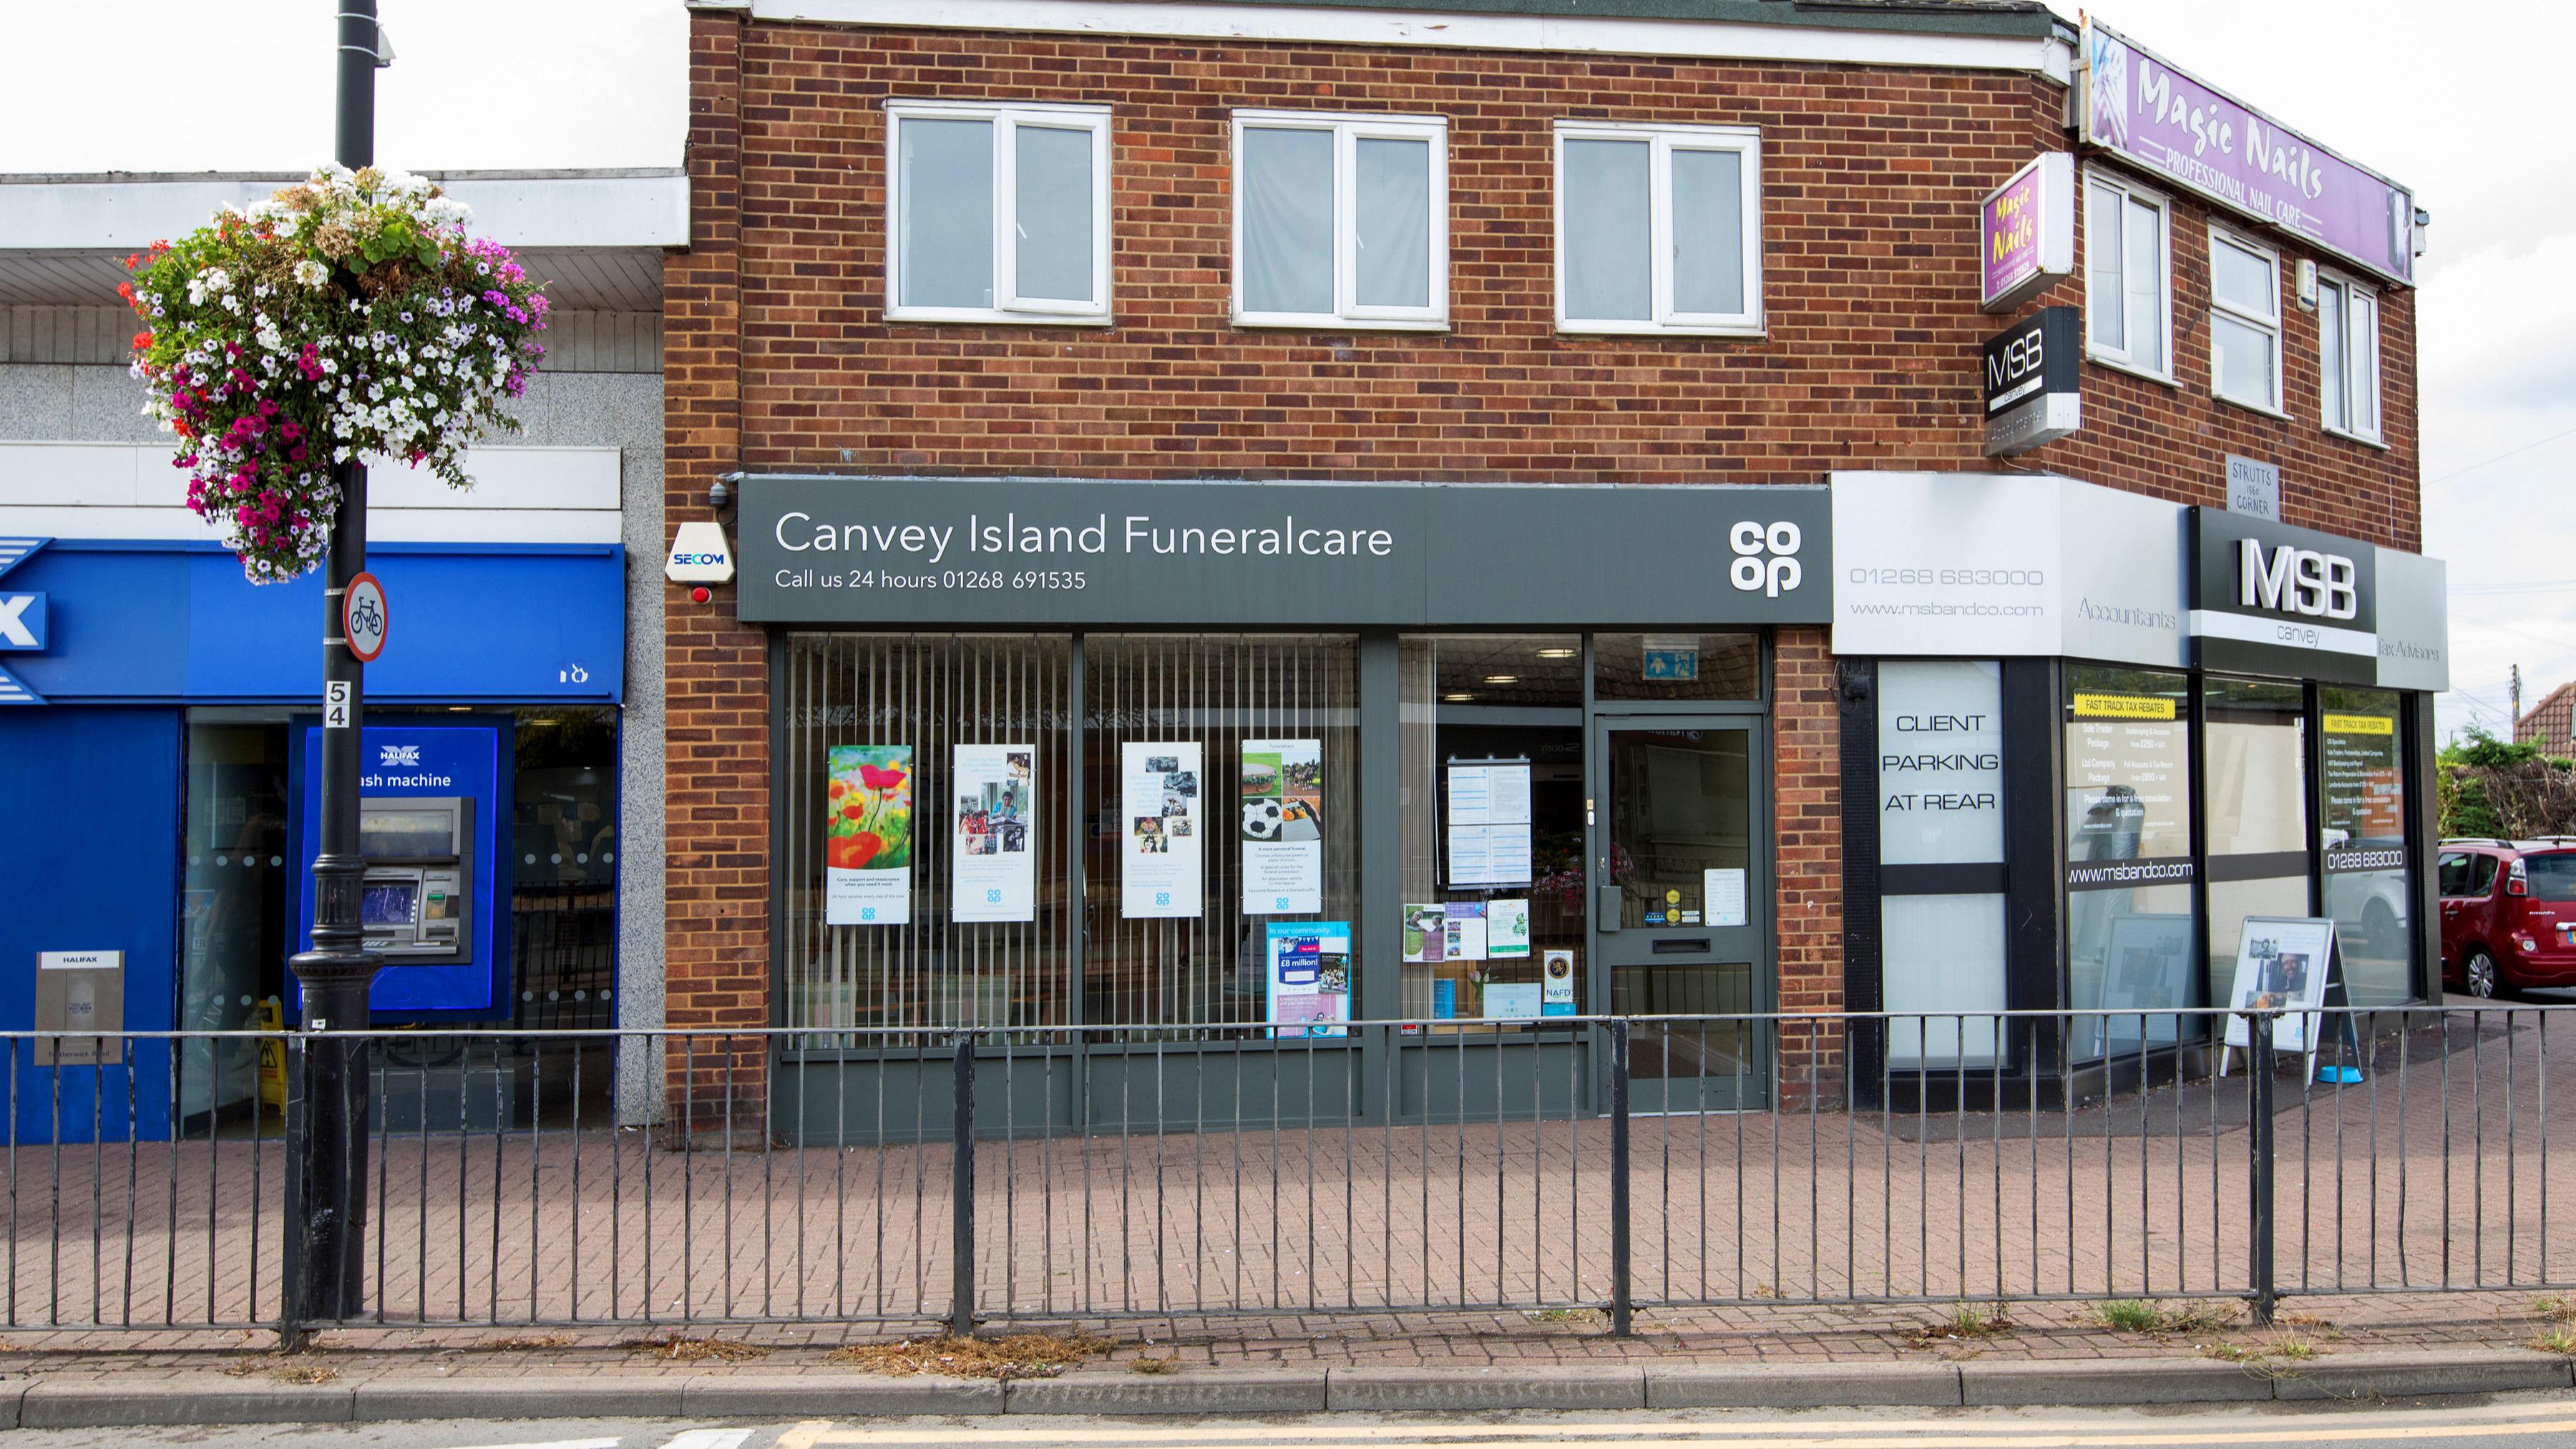 Images Canvey Island Funeralcare